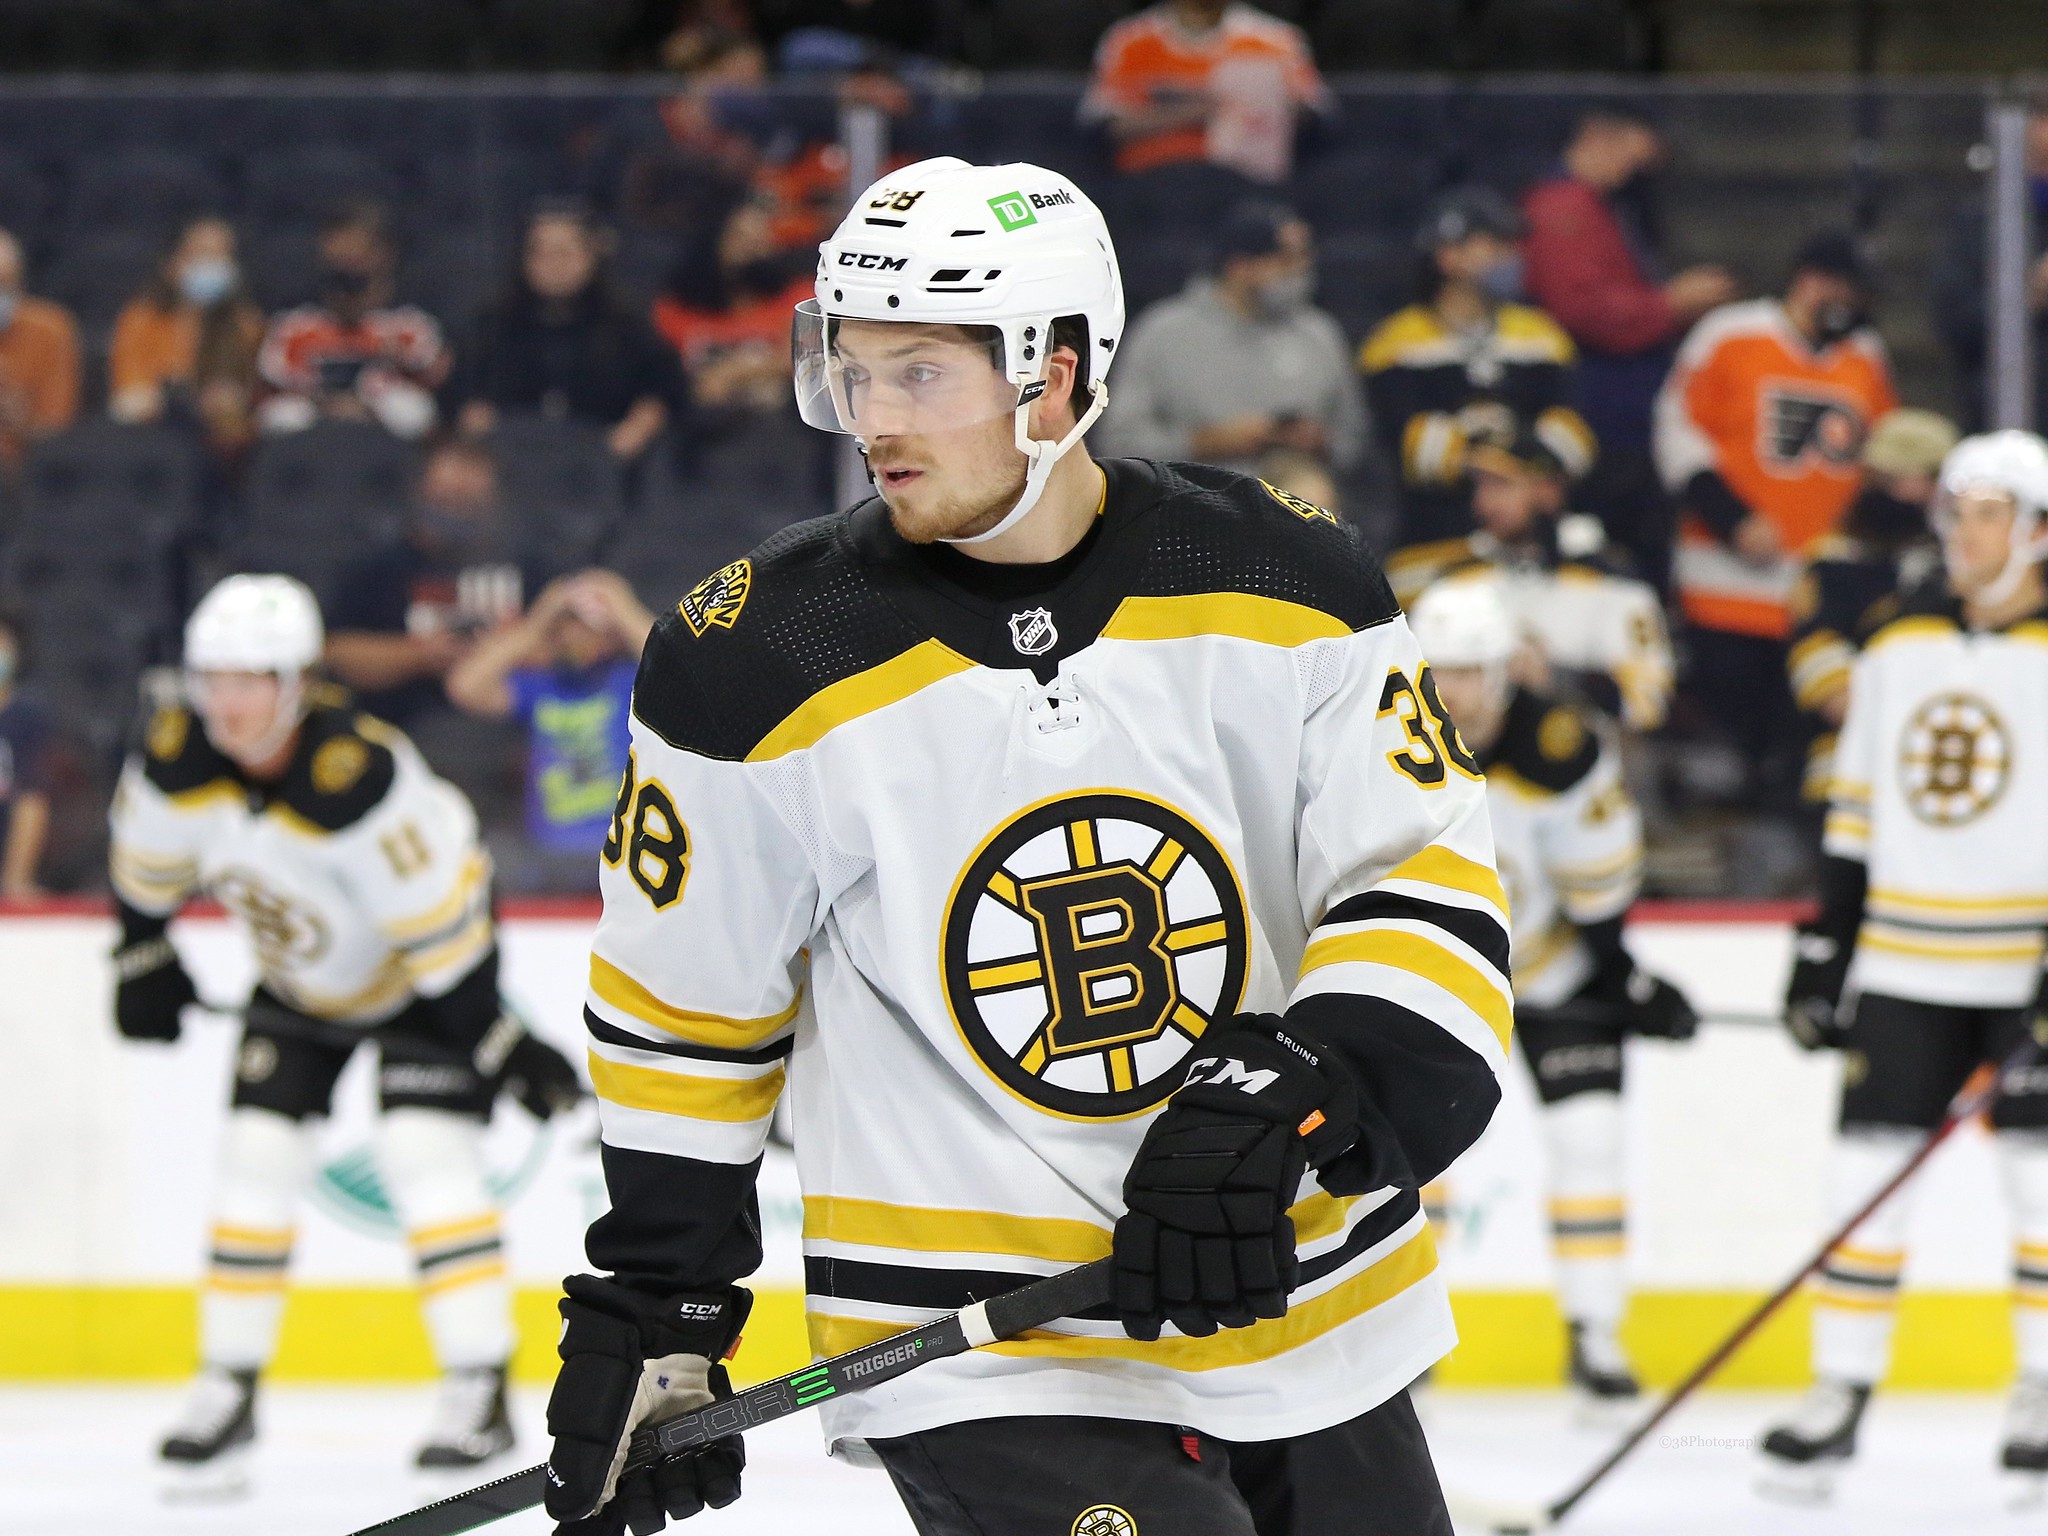 Bruins will have a third jersey in 2019-20, but it won't be 'Pooh